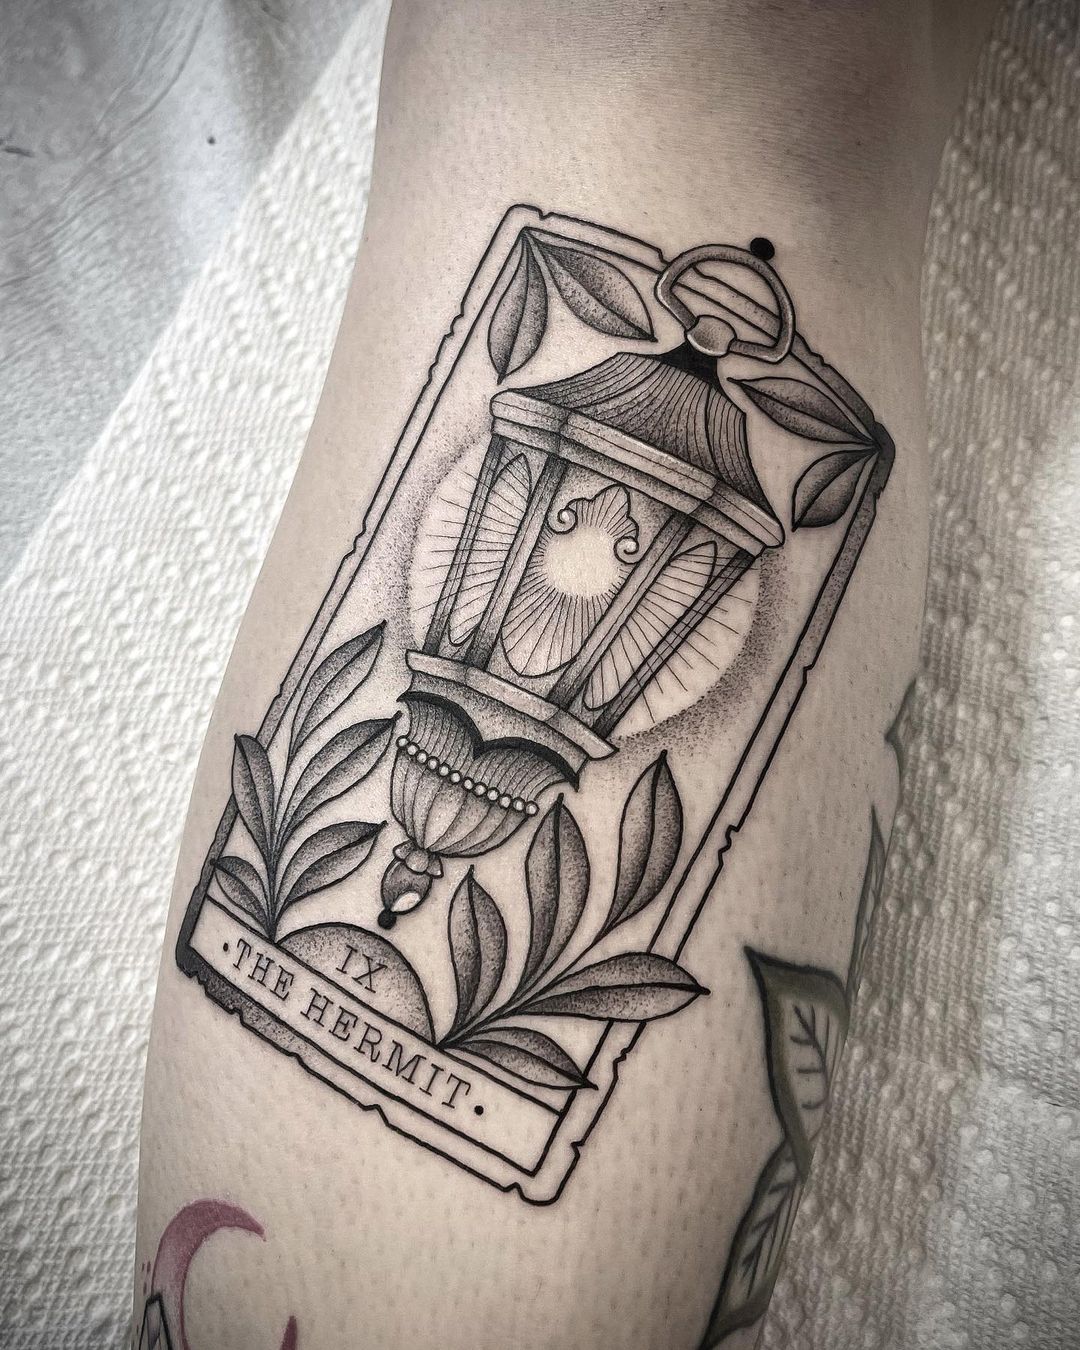 15 Tarot Card tattoos that will inspire you